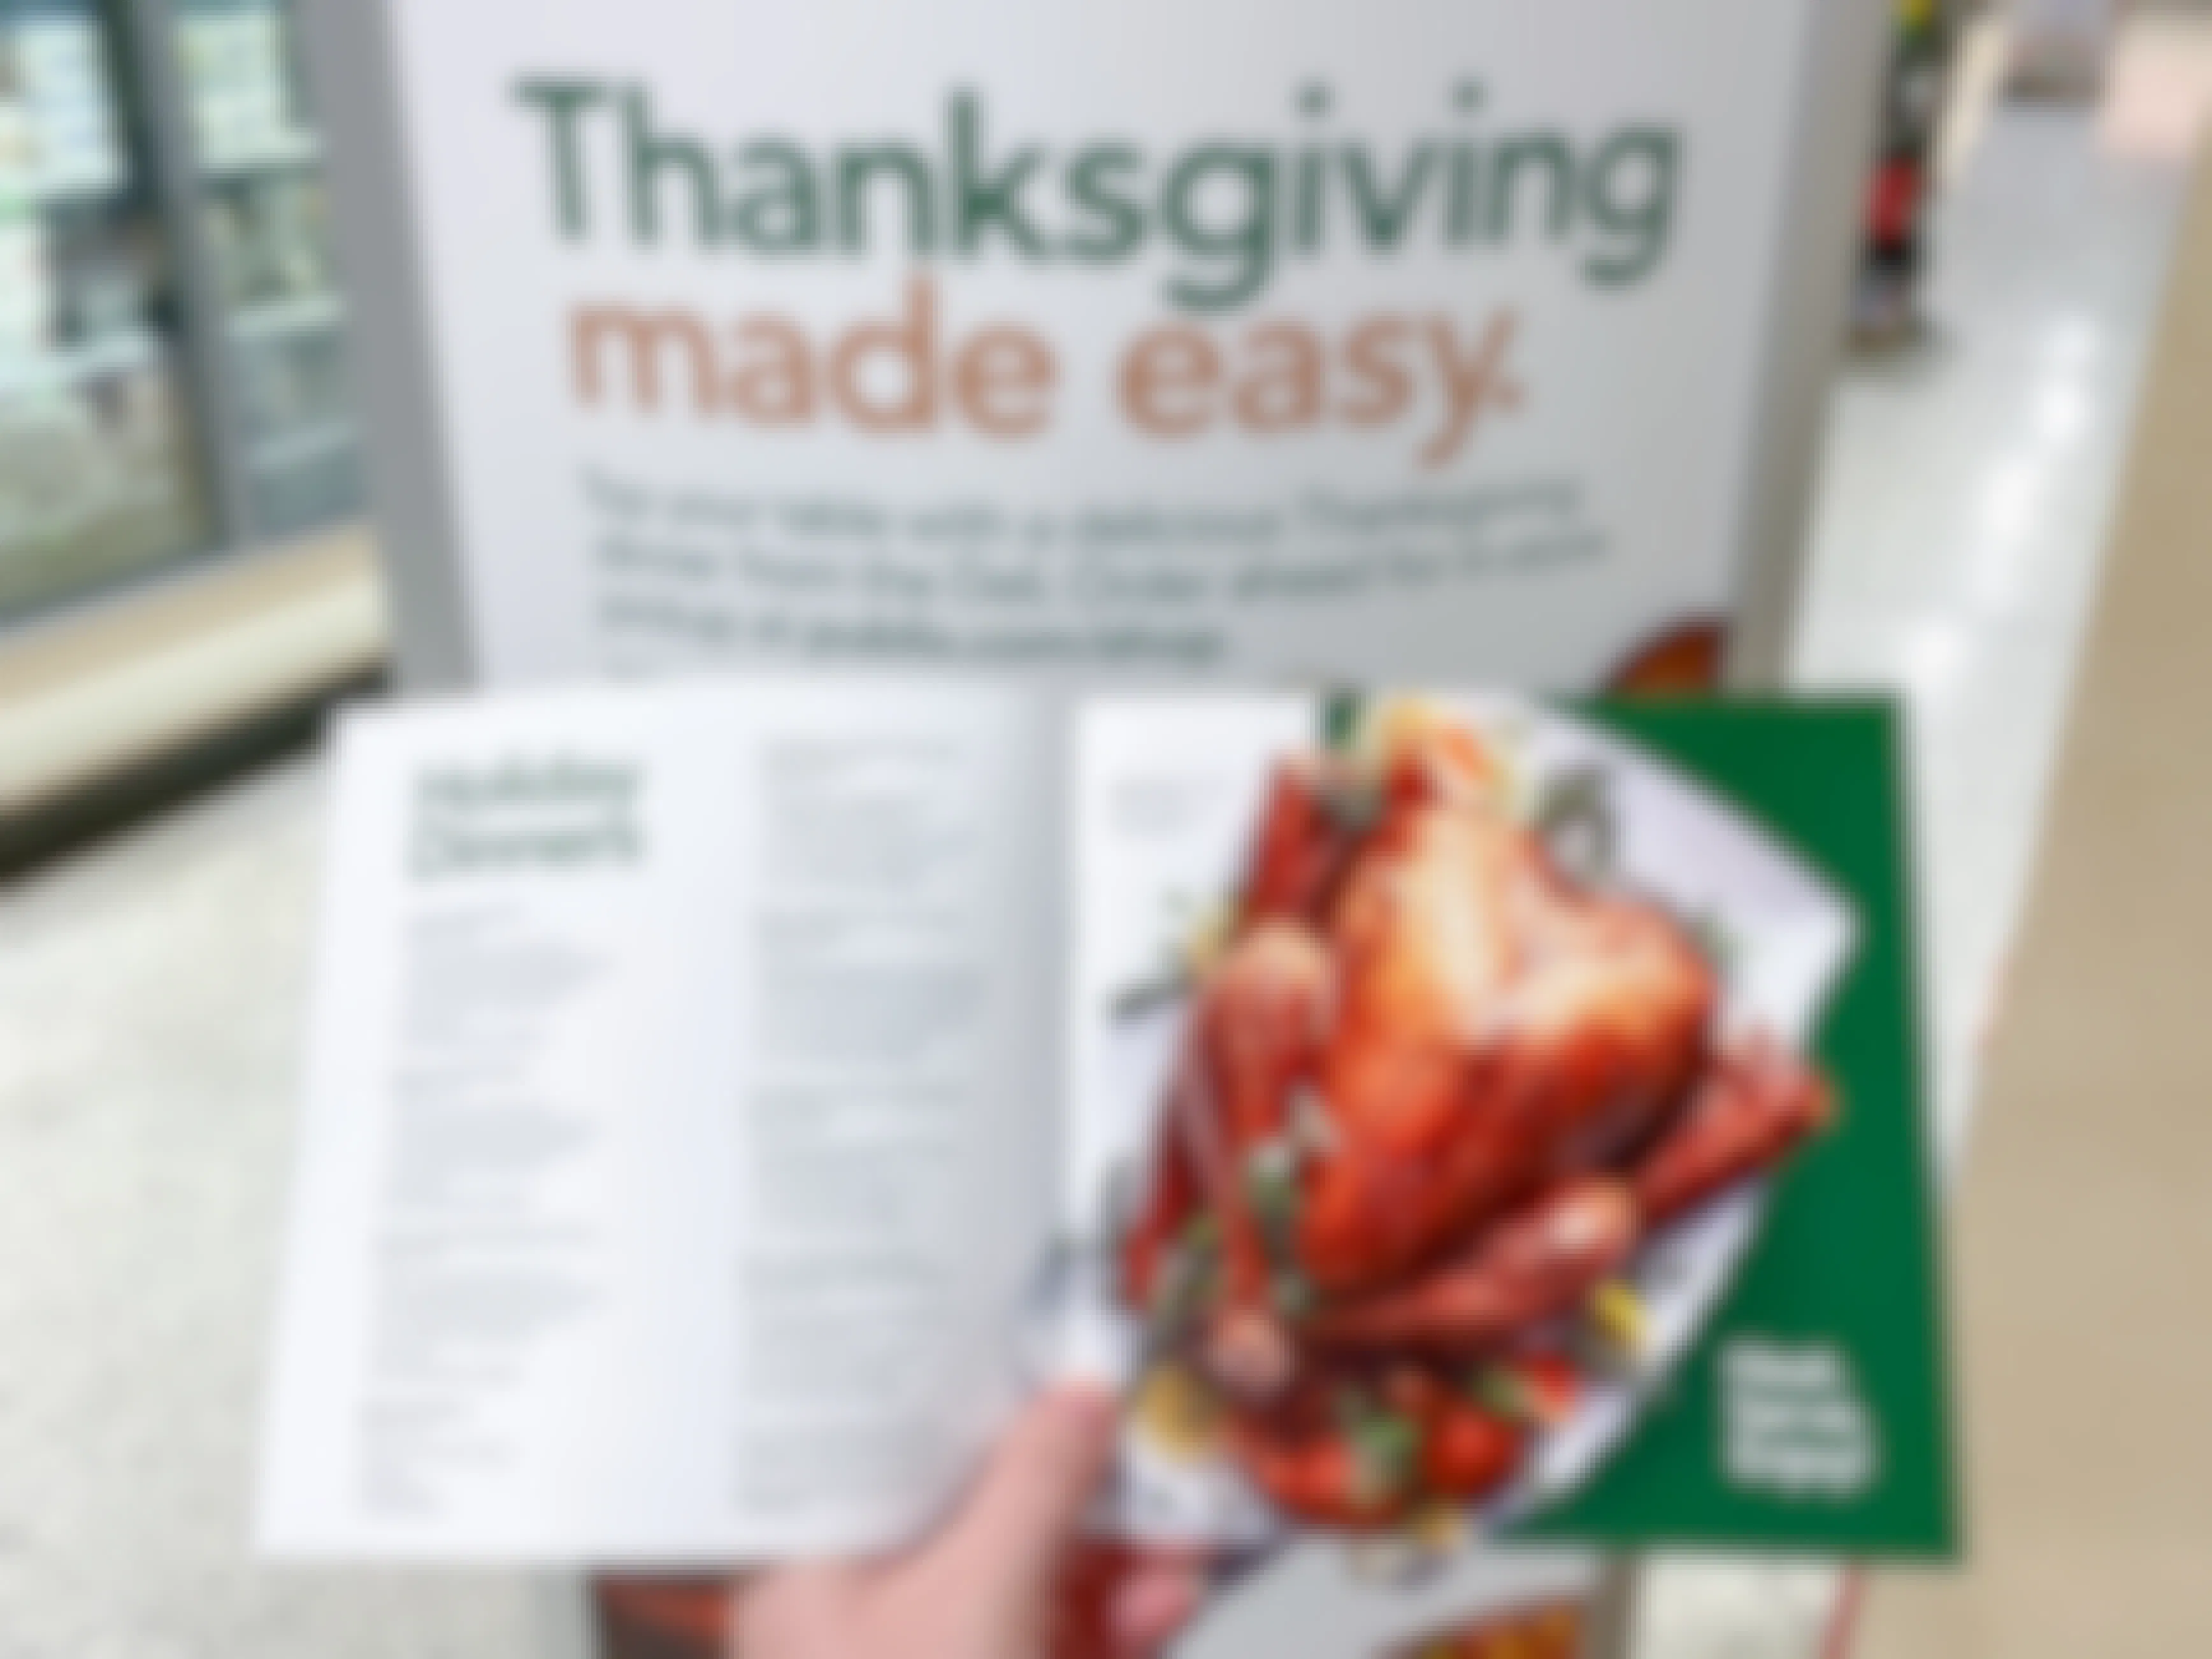 A person holding a booklet listing the Publix holiday dinner choices in front of a sign inside Publix that says, "Thanksgiving made easy. Top your table with a delicious Thanksgiving dinner from the Deli. Order ahead for in-store pickup at publix.com/shop